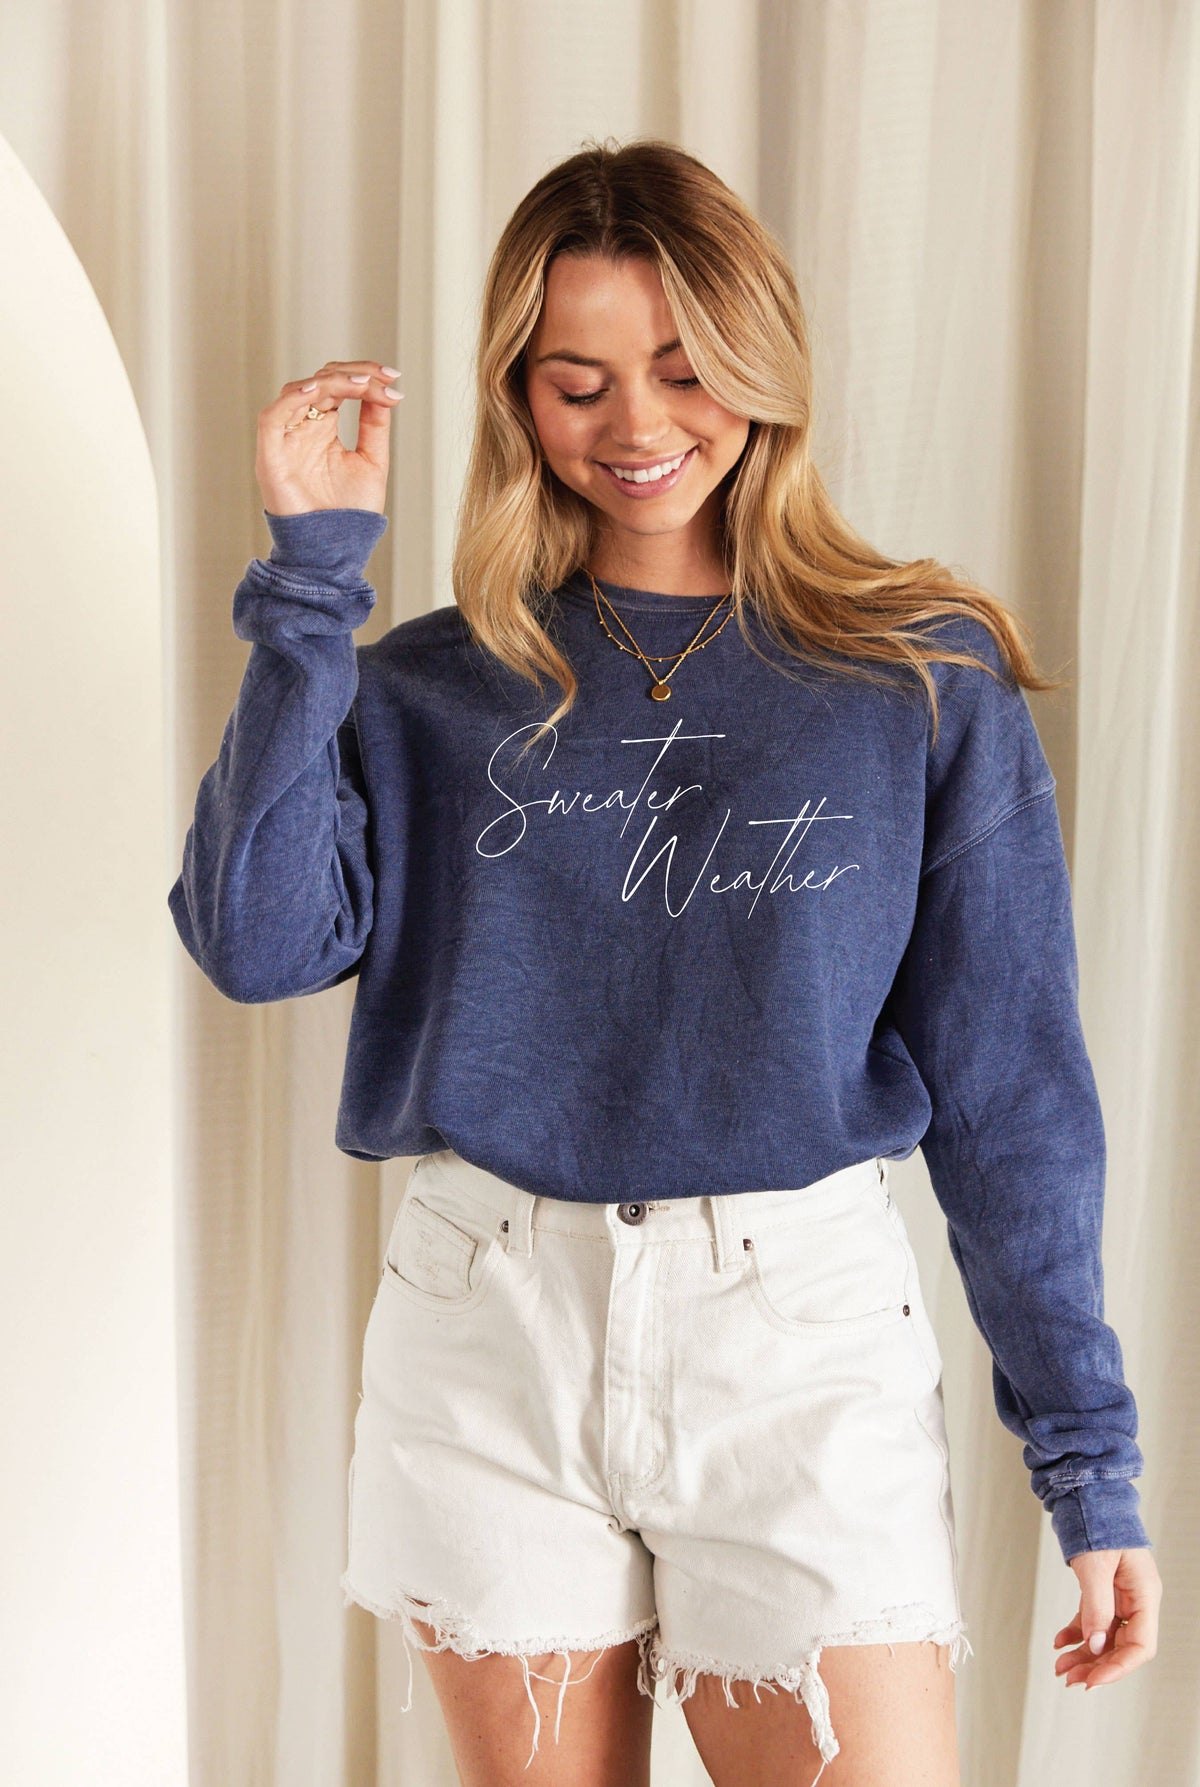 SWEATER WEATHER Mineral Graphic Sweatshirt - Premium Sweatshirt from OAT COLLECTIVE - Just $60! Shop now at Ida Louise Boutique